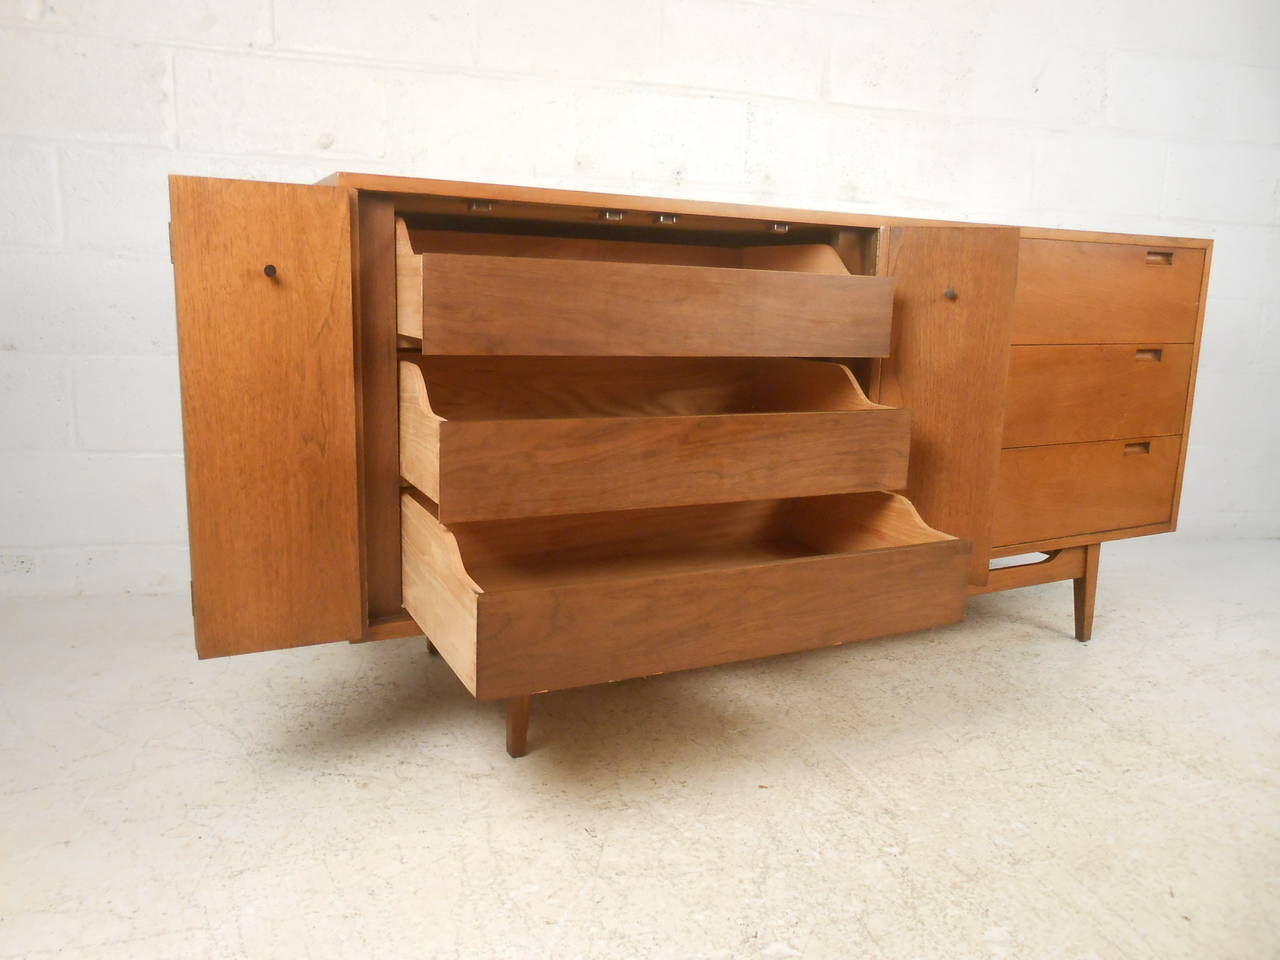 Rare vintage dresser with six drawers made by American Of Martinsville. Walnut grain throughout, tapered legs with sculpted stretcher, carved handles, rosewood cone pulls. Very unusual design with plenty of functionality.

(Please confirm item